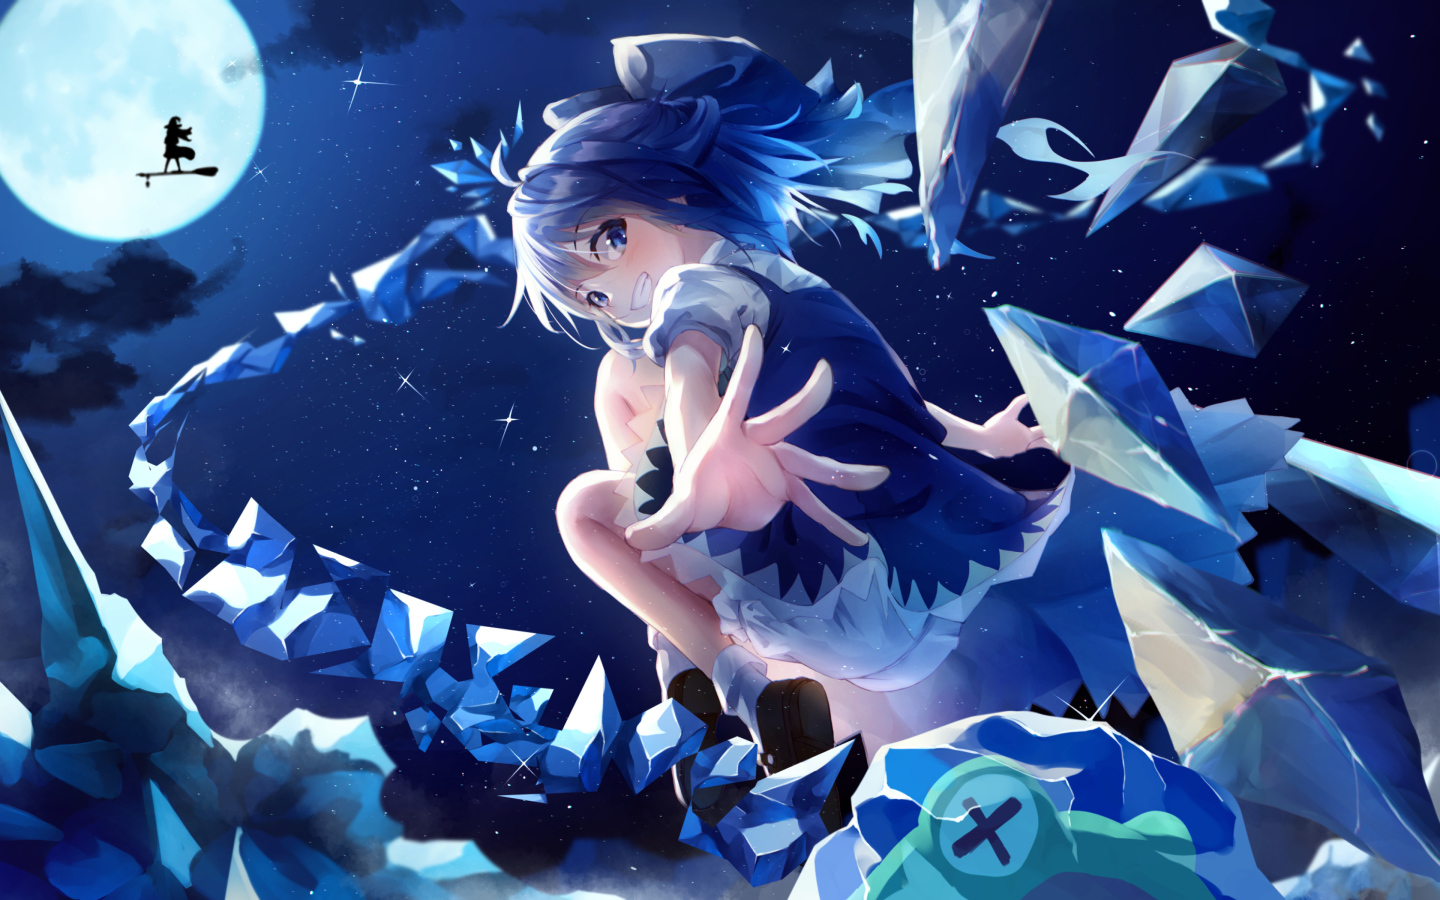 Anime girl with blue hair throws crystals